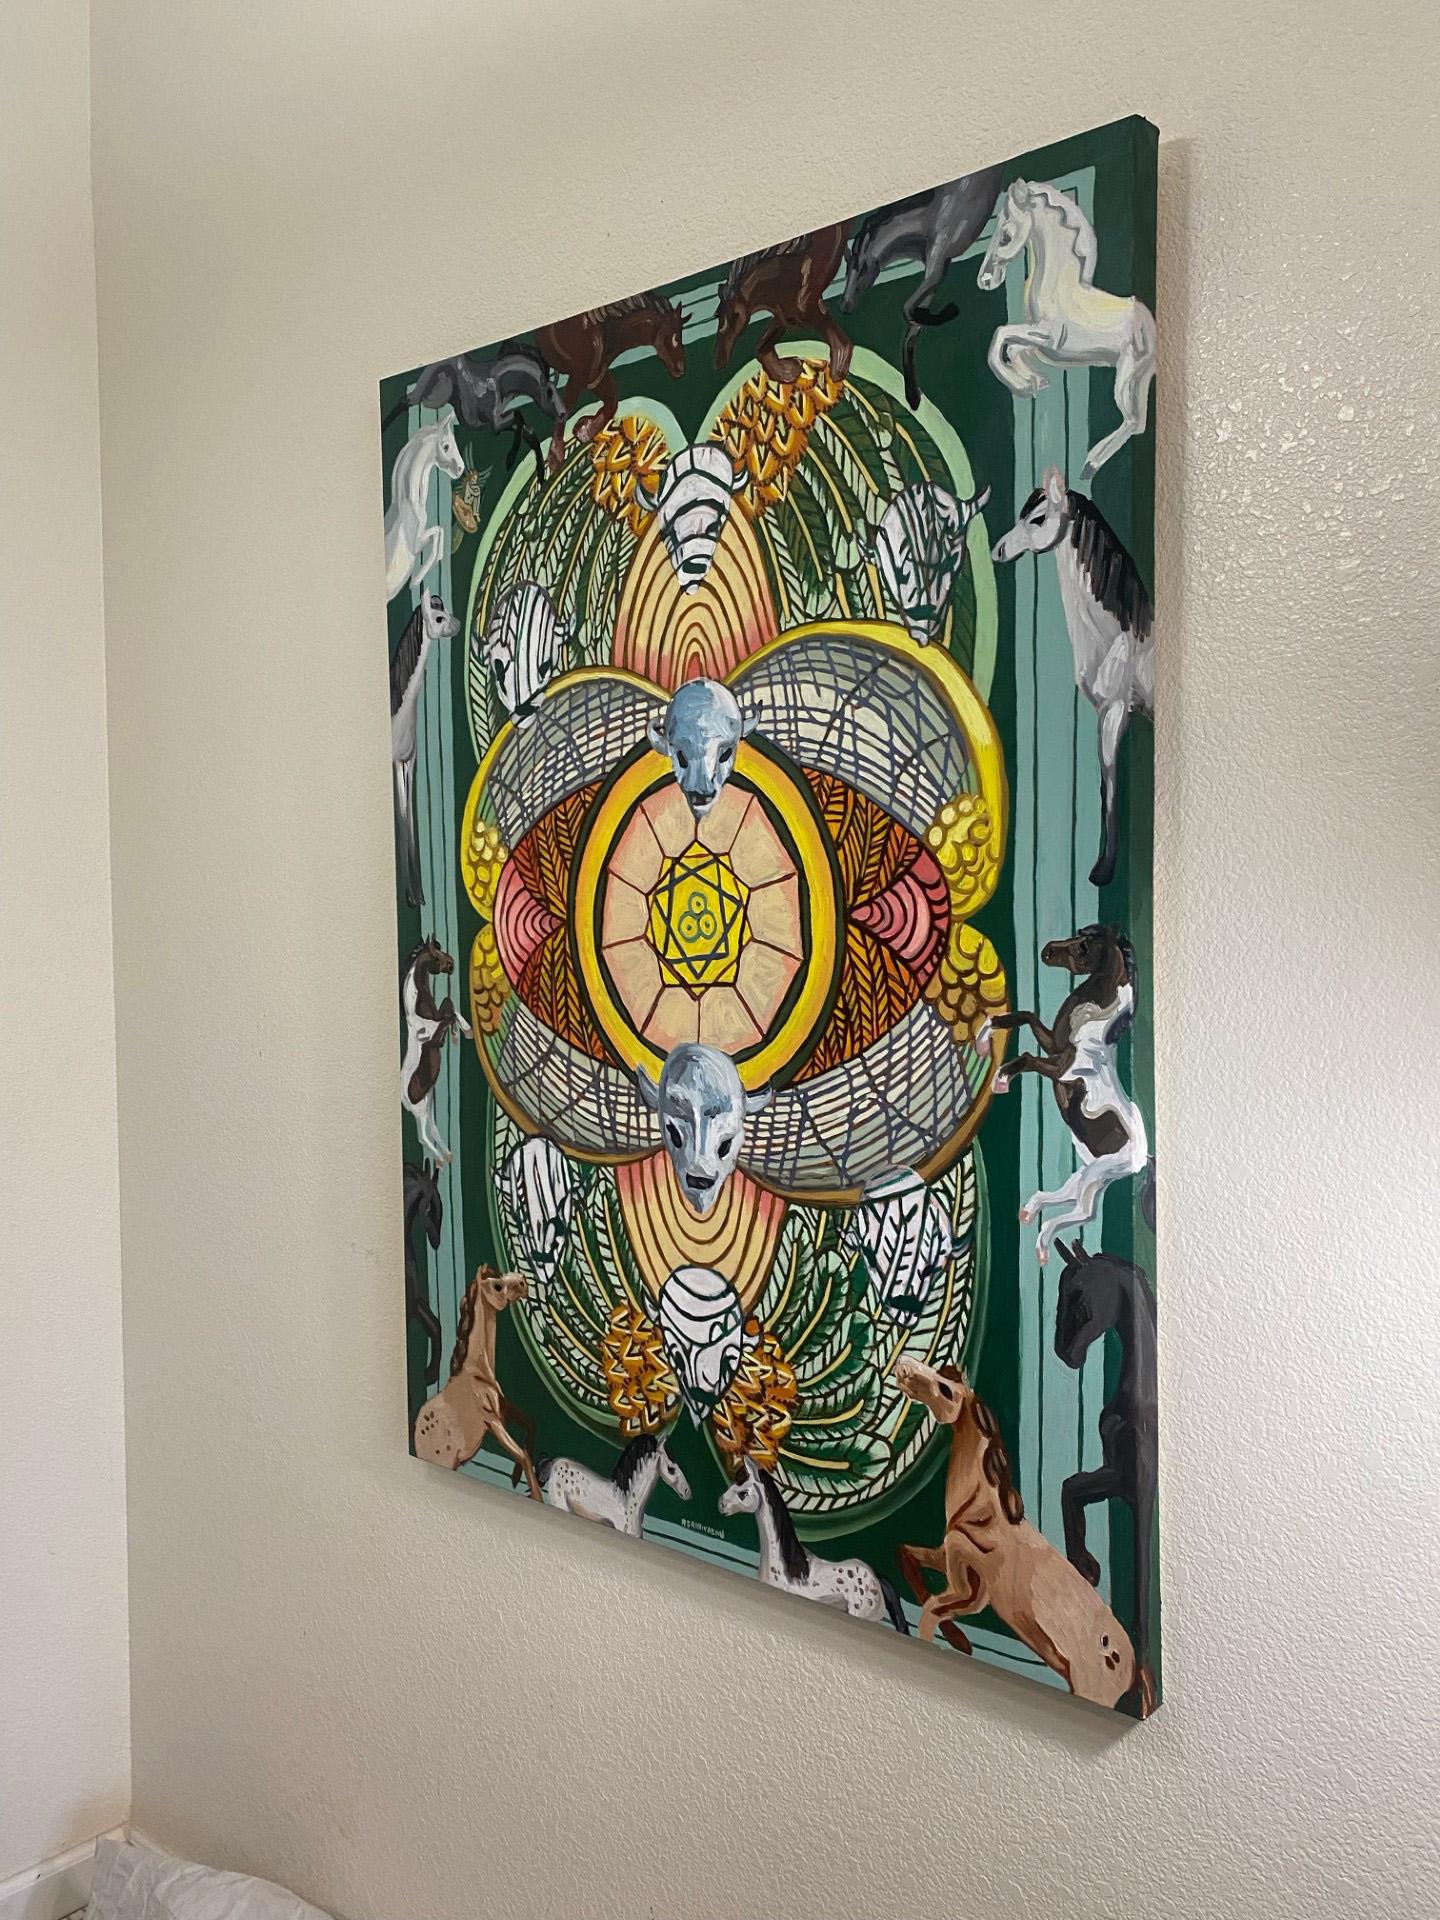 <p>Artist Comments<br>Inspired by the Eight of Pentacles tarot card, the vibrant green hues of the artwork symbolize growth, fertility, and abundance, including aspects related to money. A mythical white bison replaces traditional coin imagery,